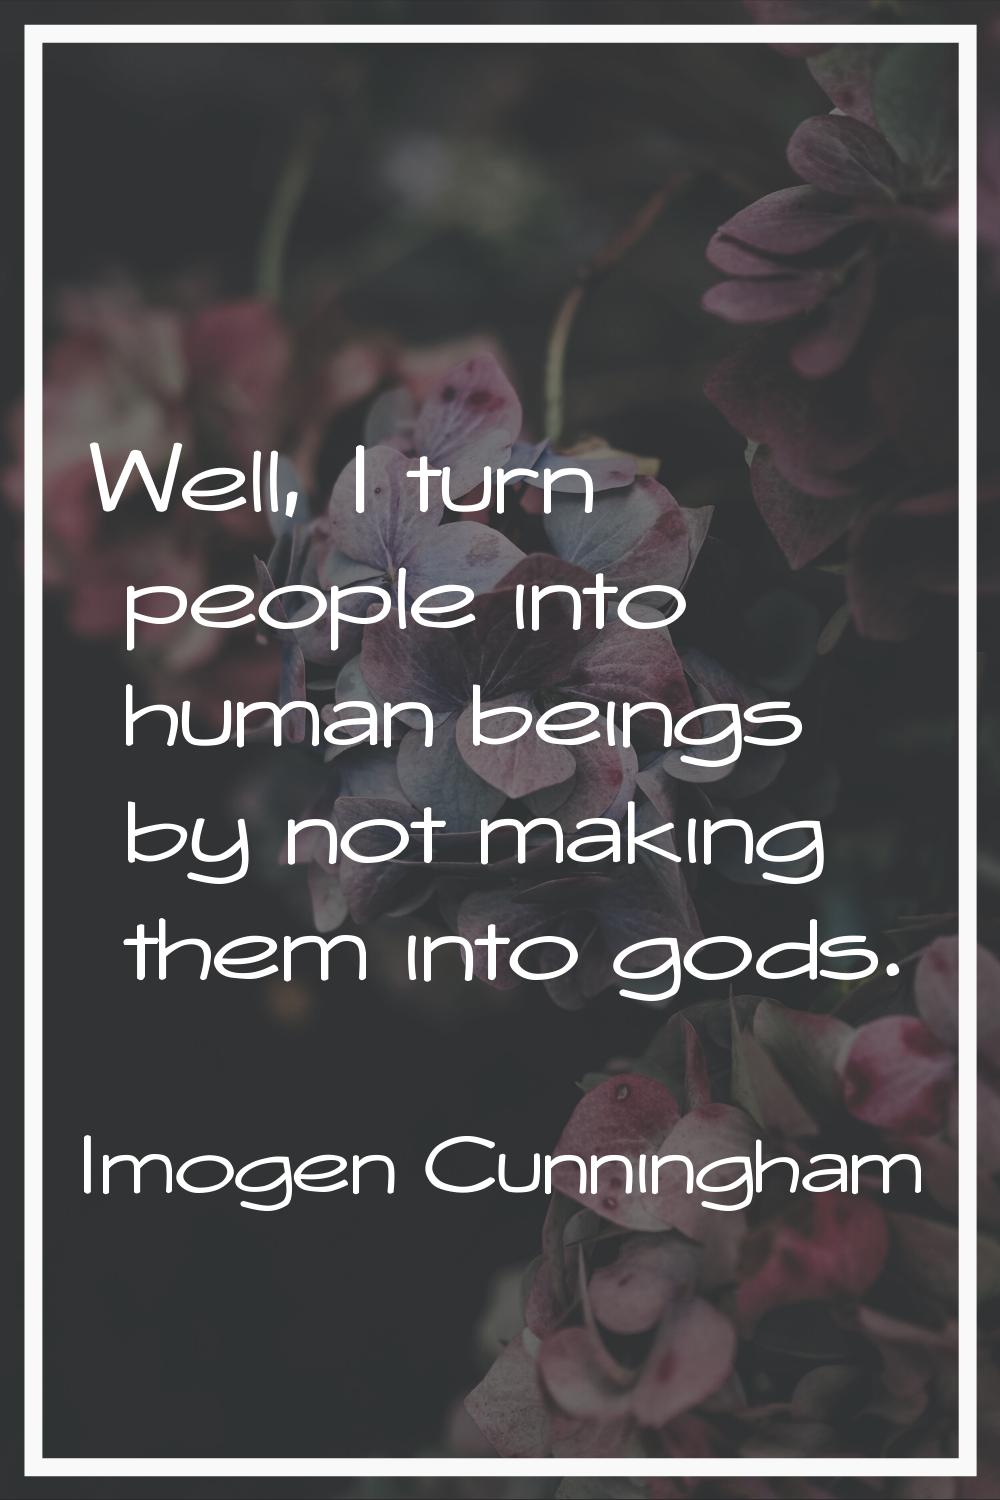 Well, I turn people into human beings by not making them into gods.